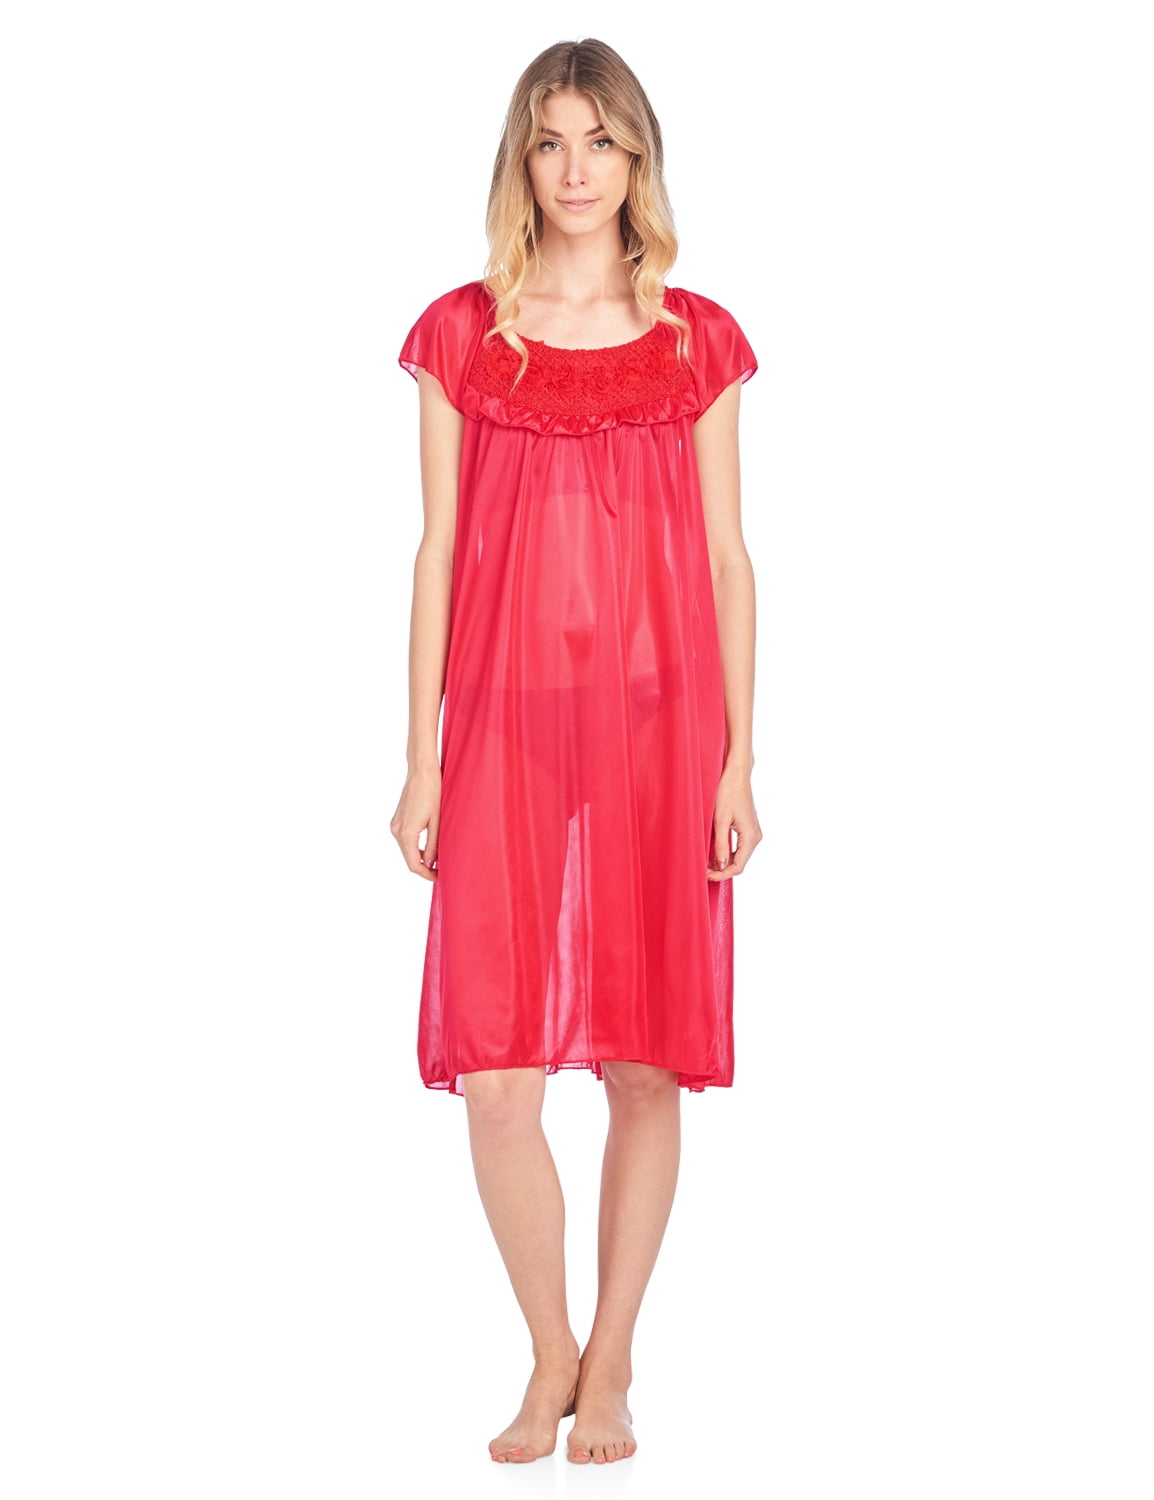 women's tricot nightgowns